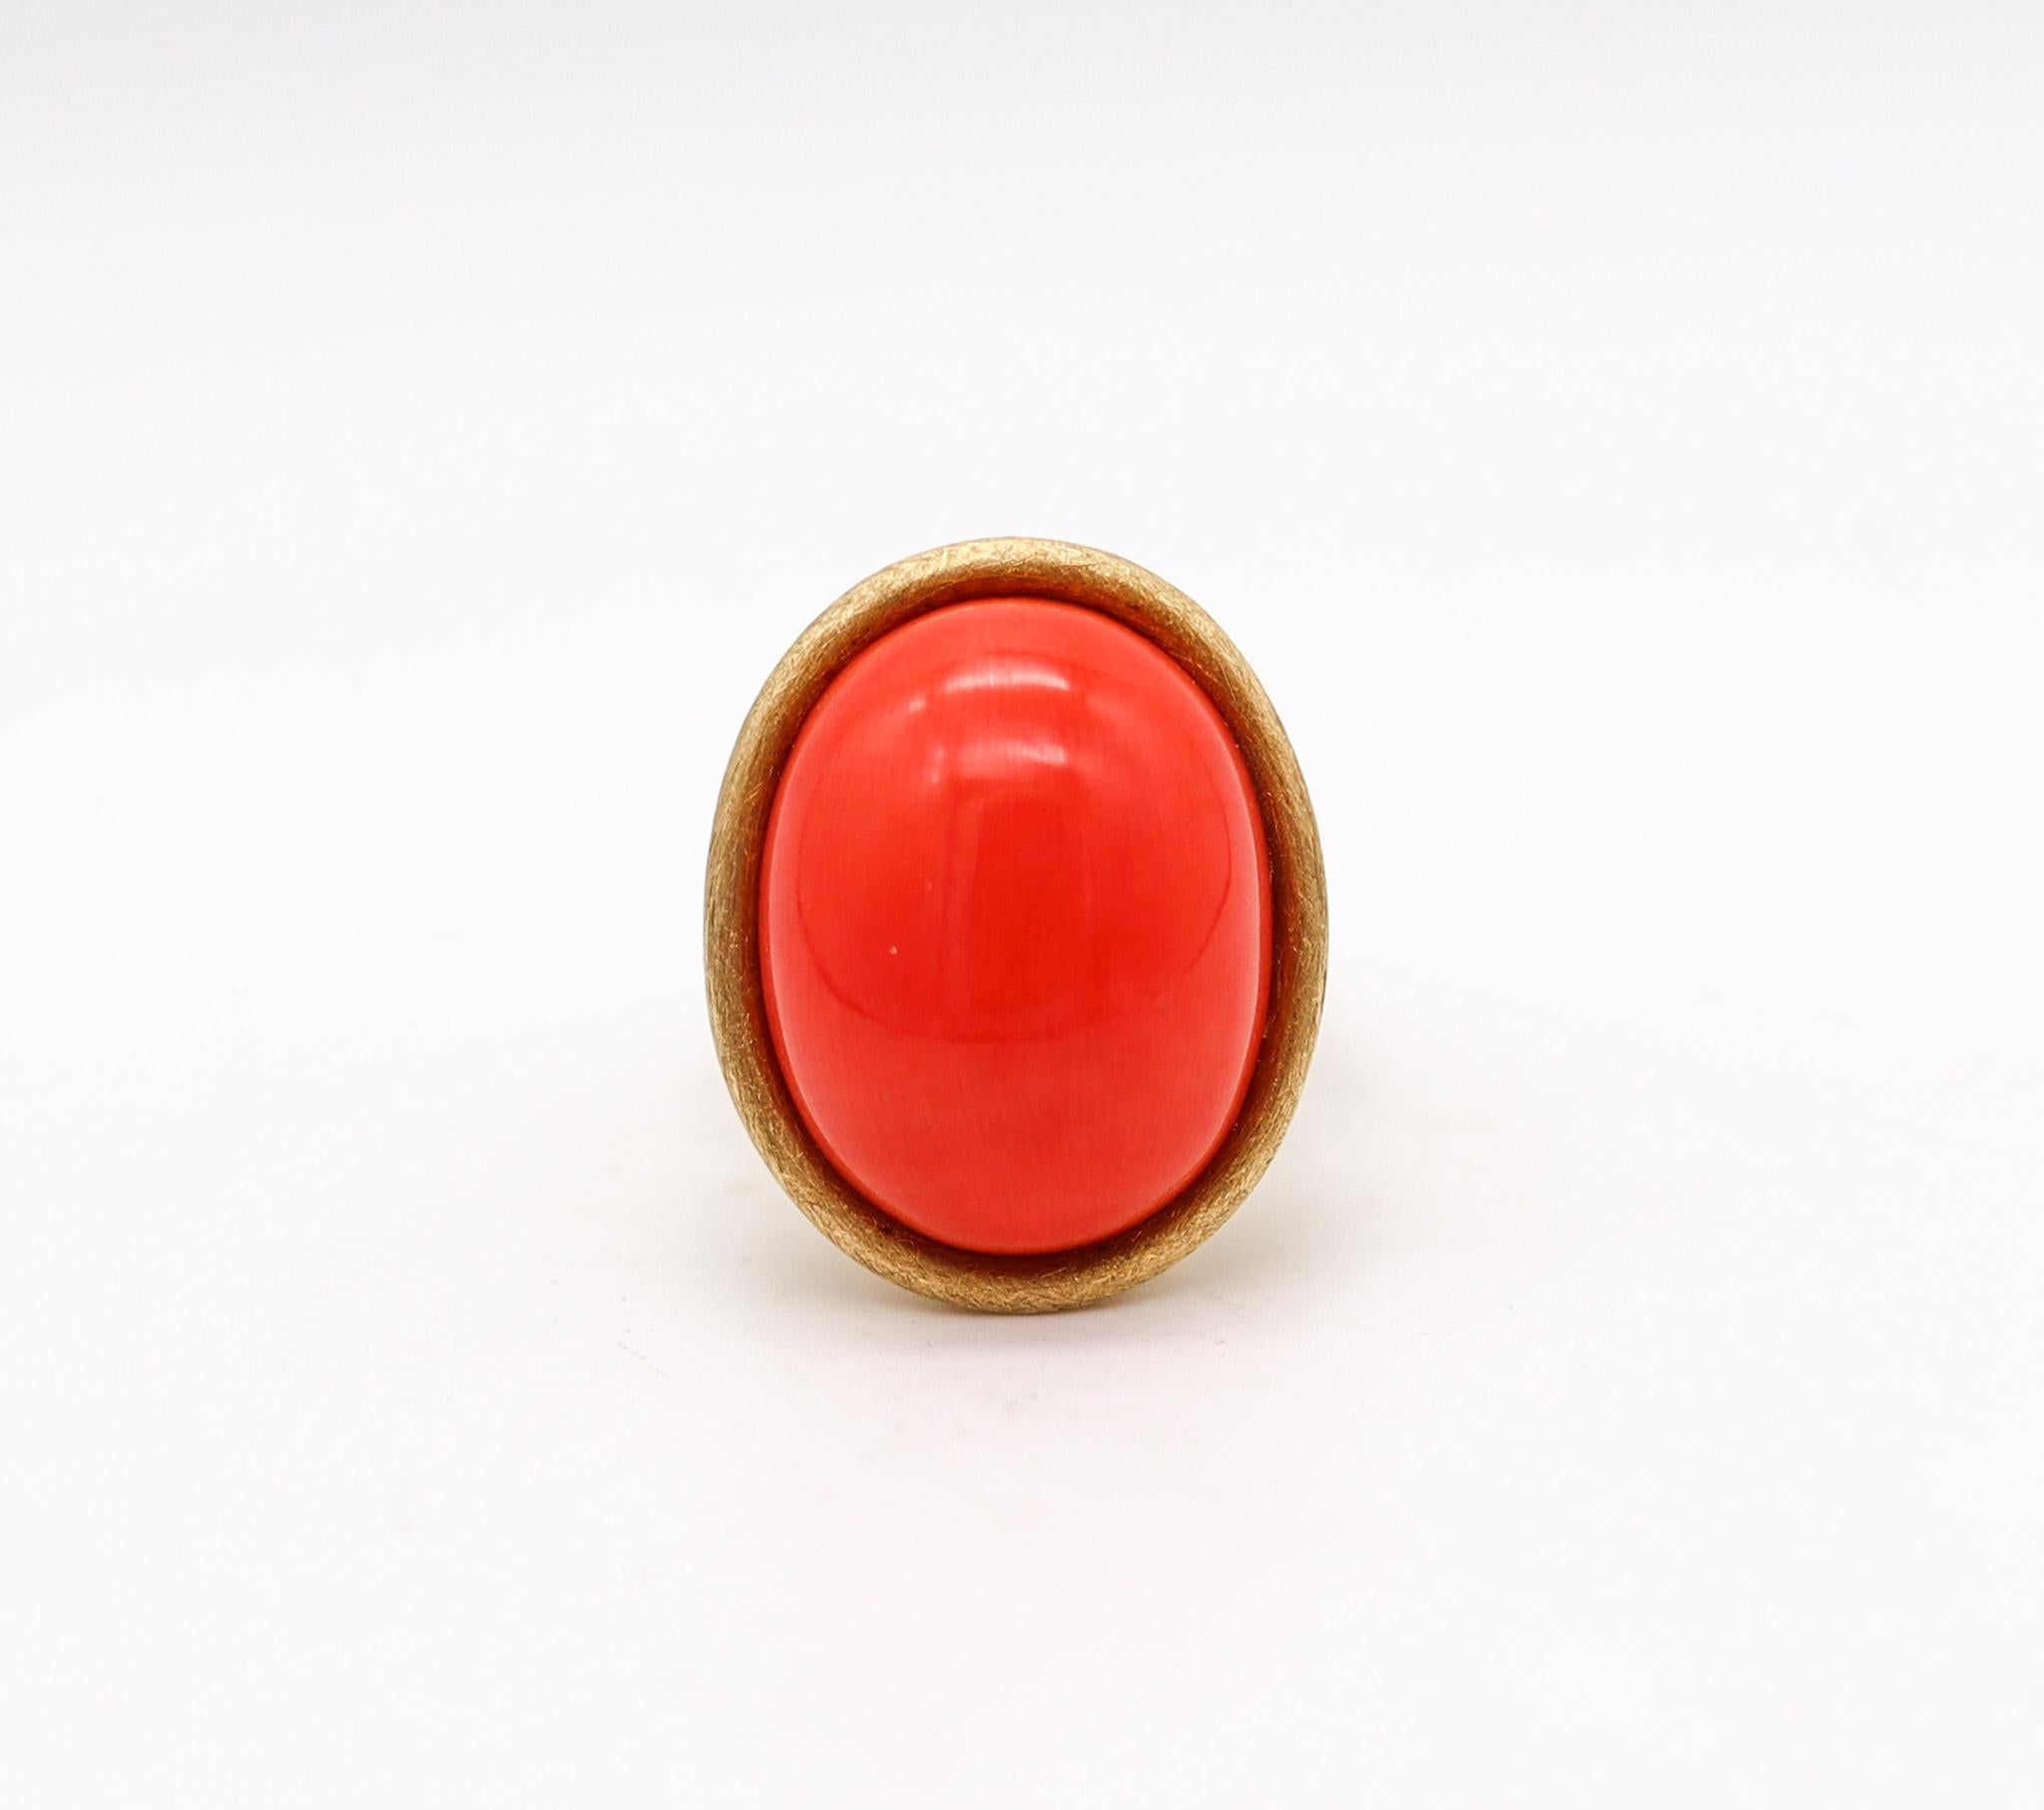 Sculptural cocktail ring with Italian coral.

Stupendous cocktail ring, created in Italy in the late 20th century. This chic and modern ring was crafted with sculptural modernist shapes in solid yellow gold of 18 karats with textured brushed finish.